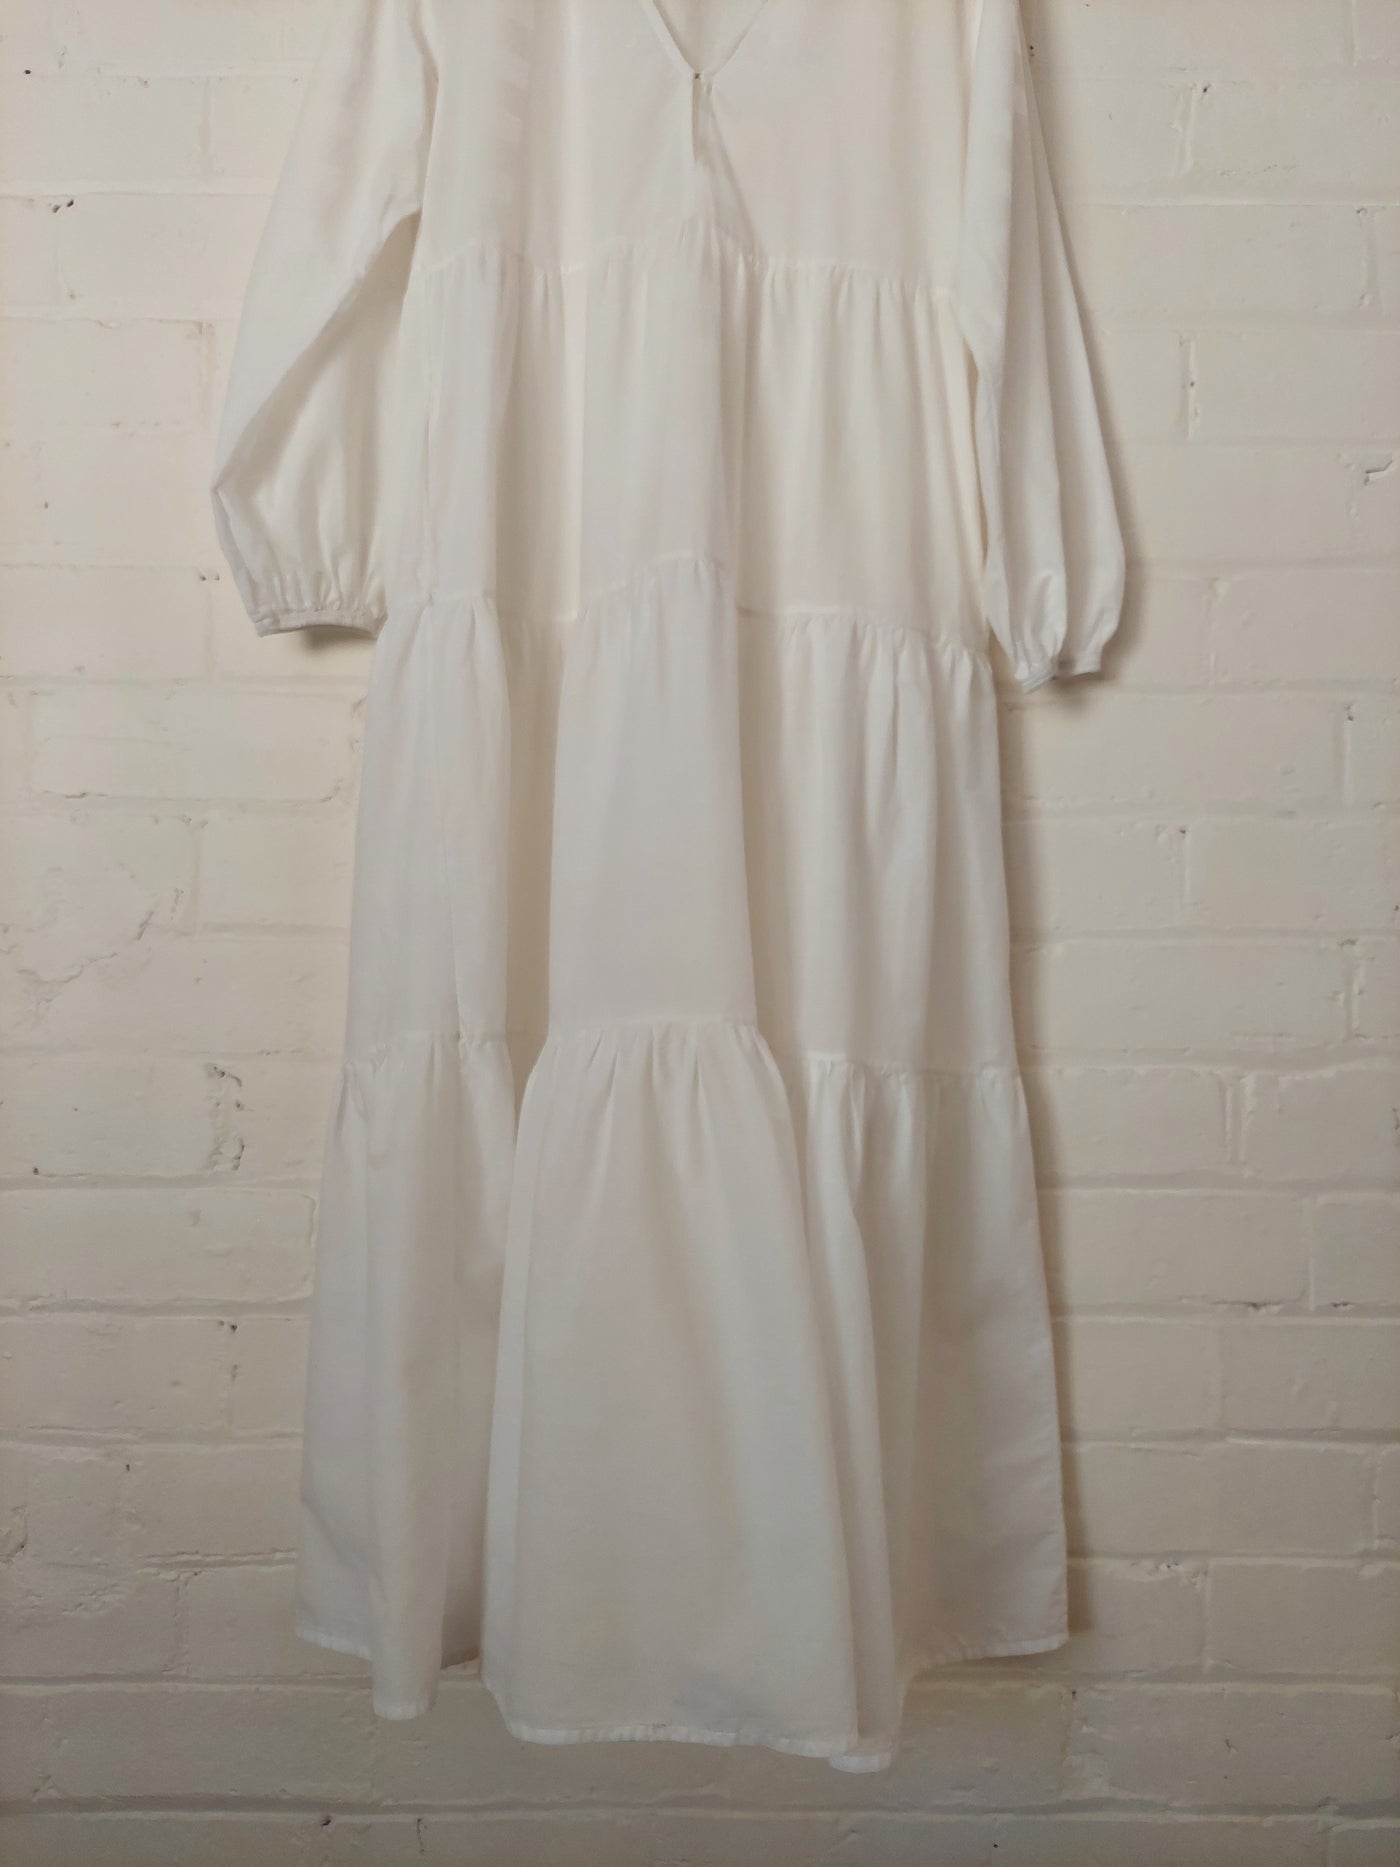 Matteau Long Sleeve Tiered Maxi Dress in White, Size 2 (AU 8 / US 4)